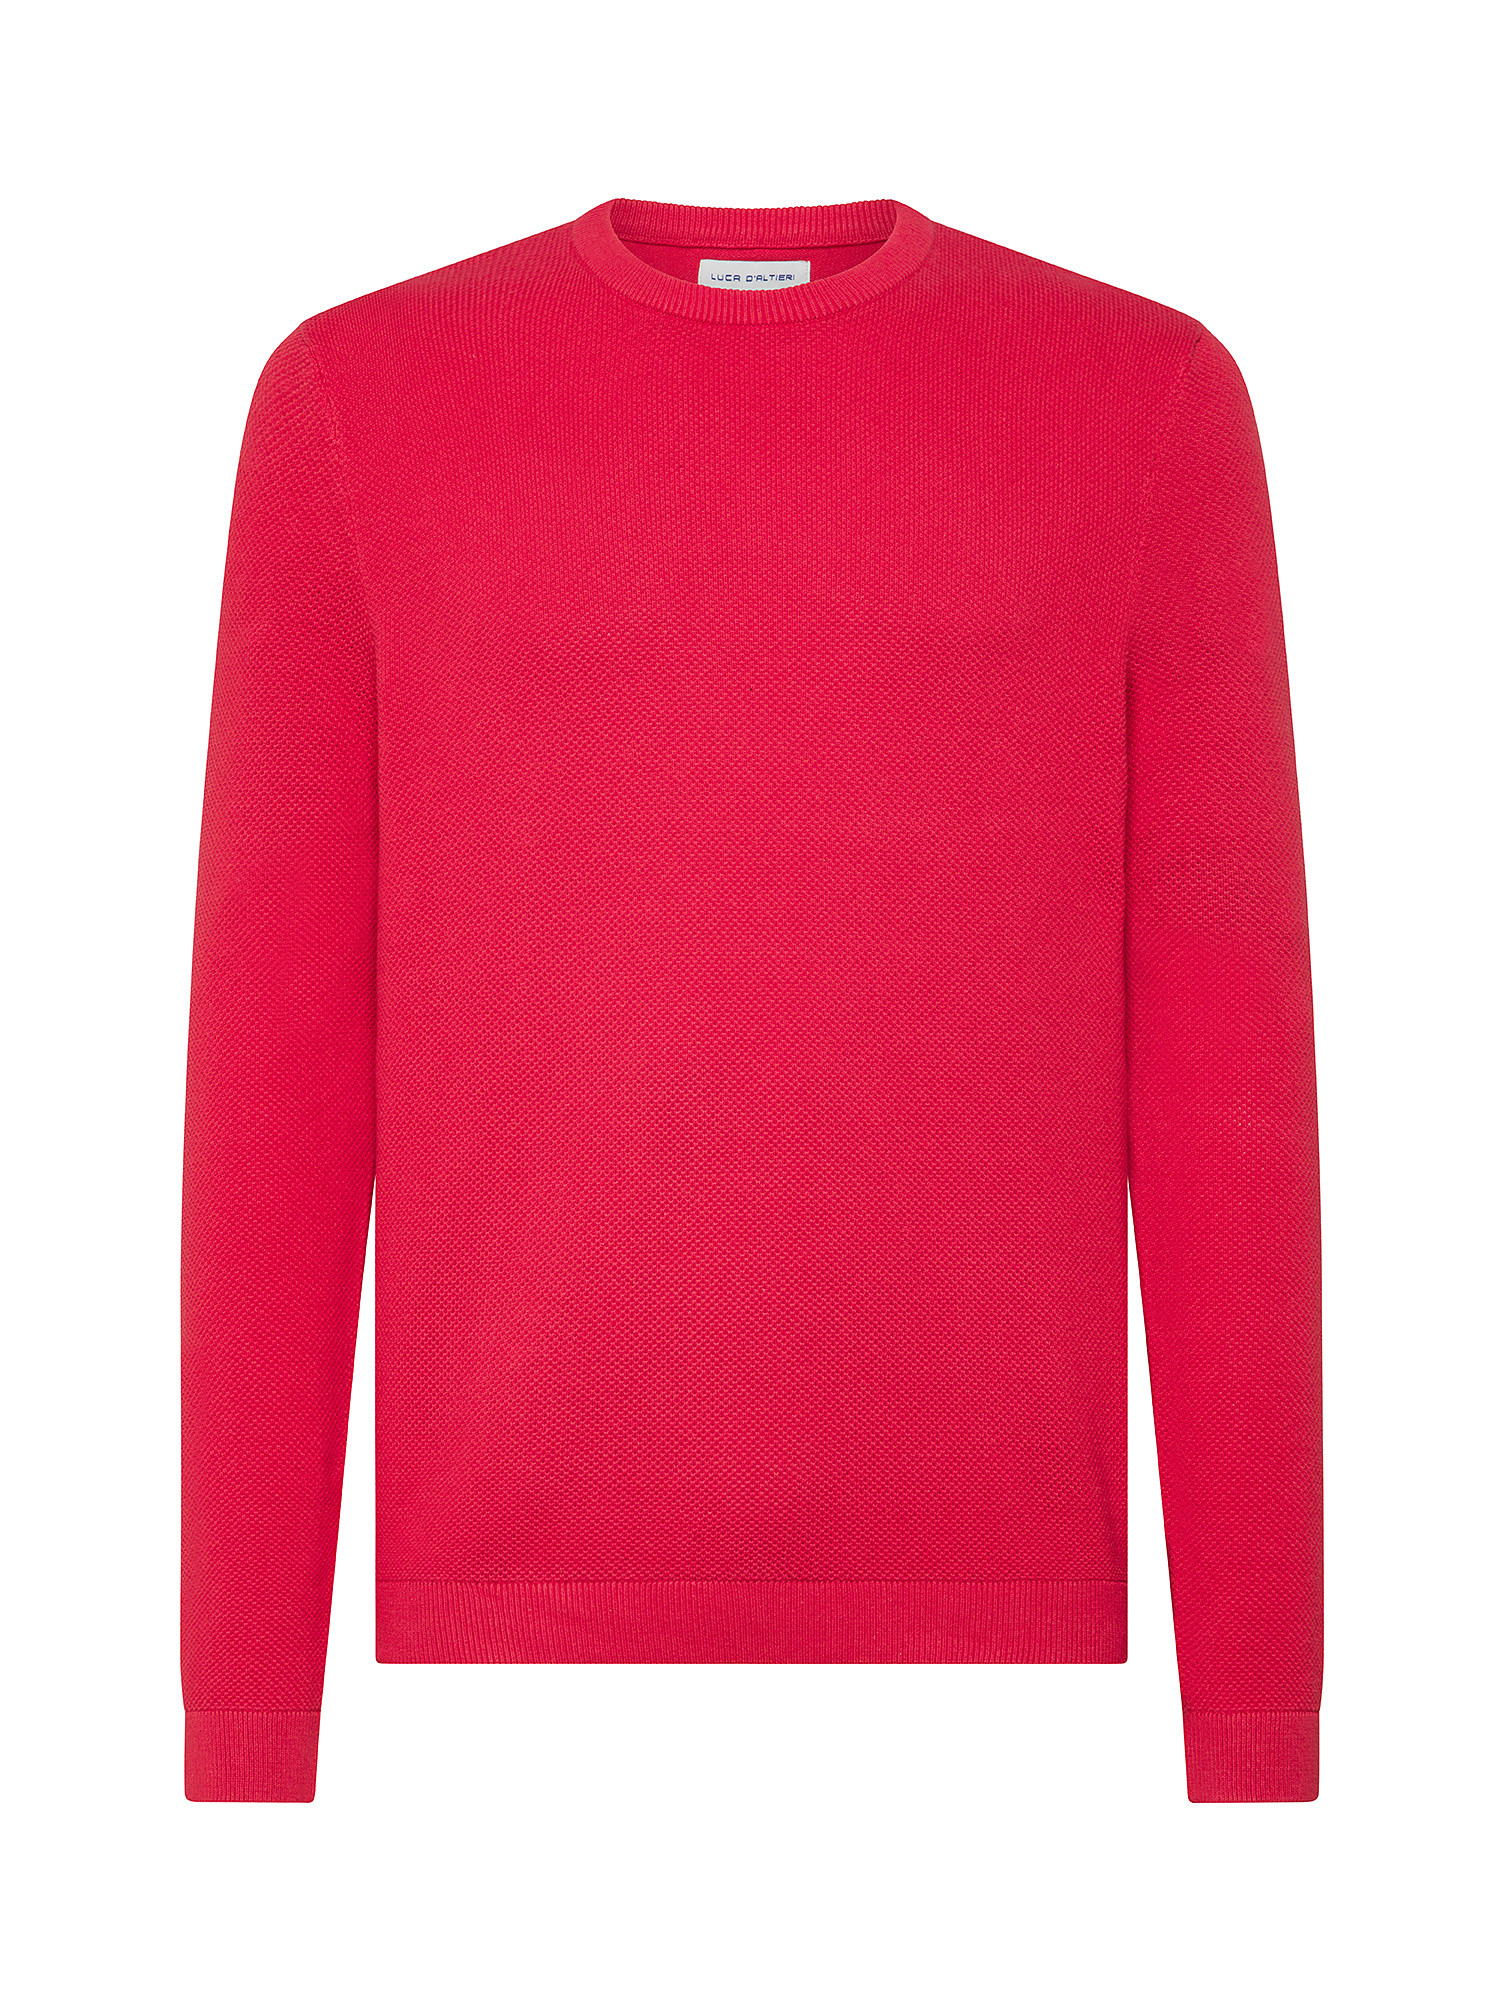 Luca D'Altieri - Crew neck sweater in pure cotton, Red, large image number 0